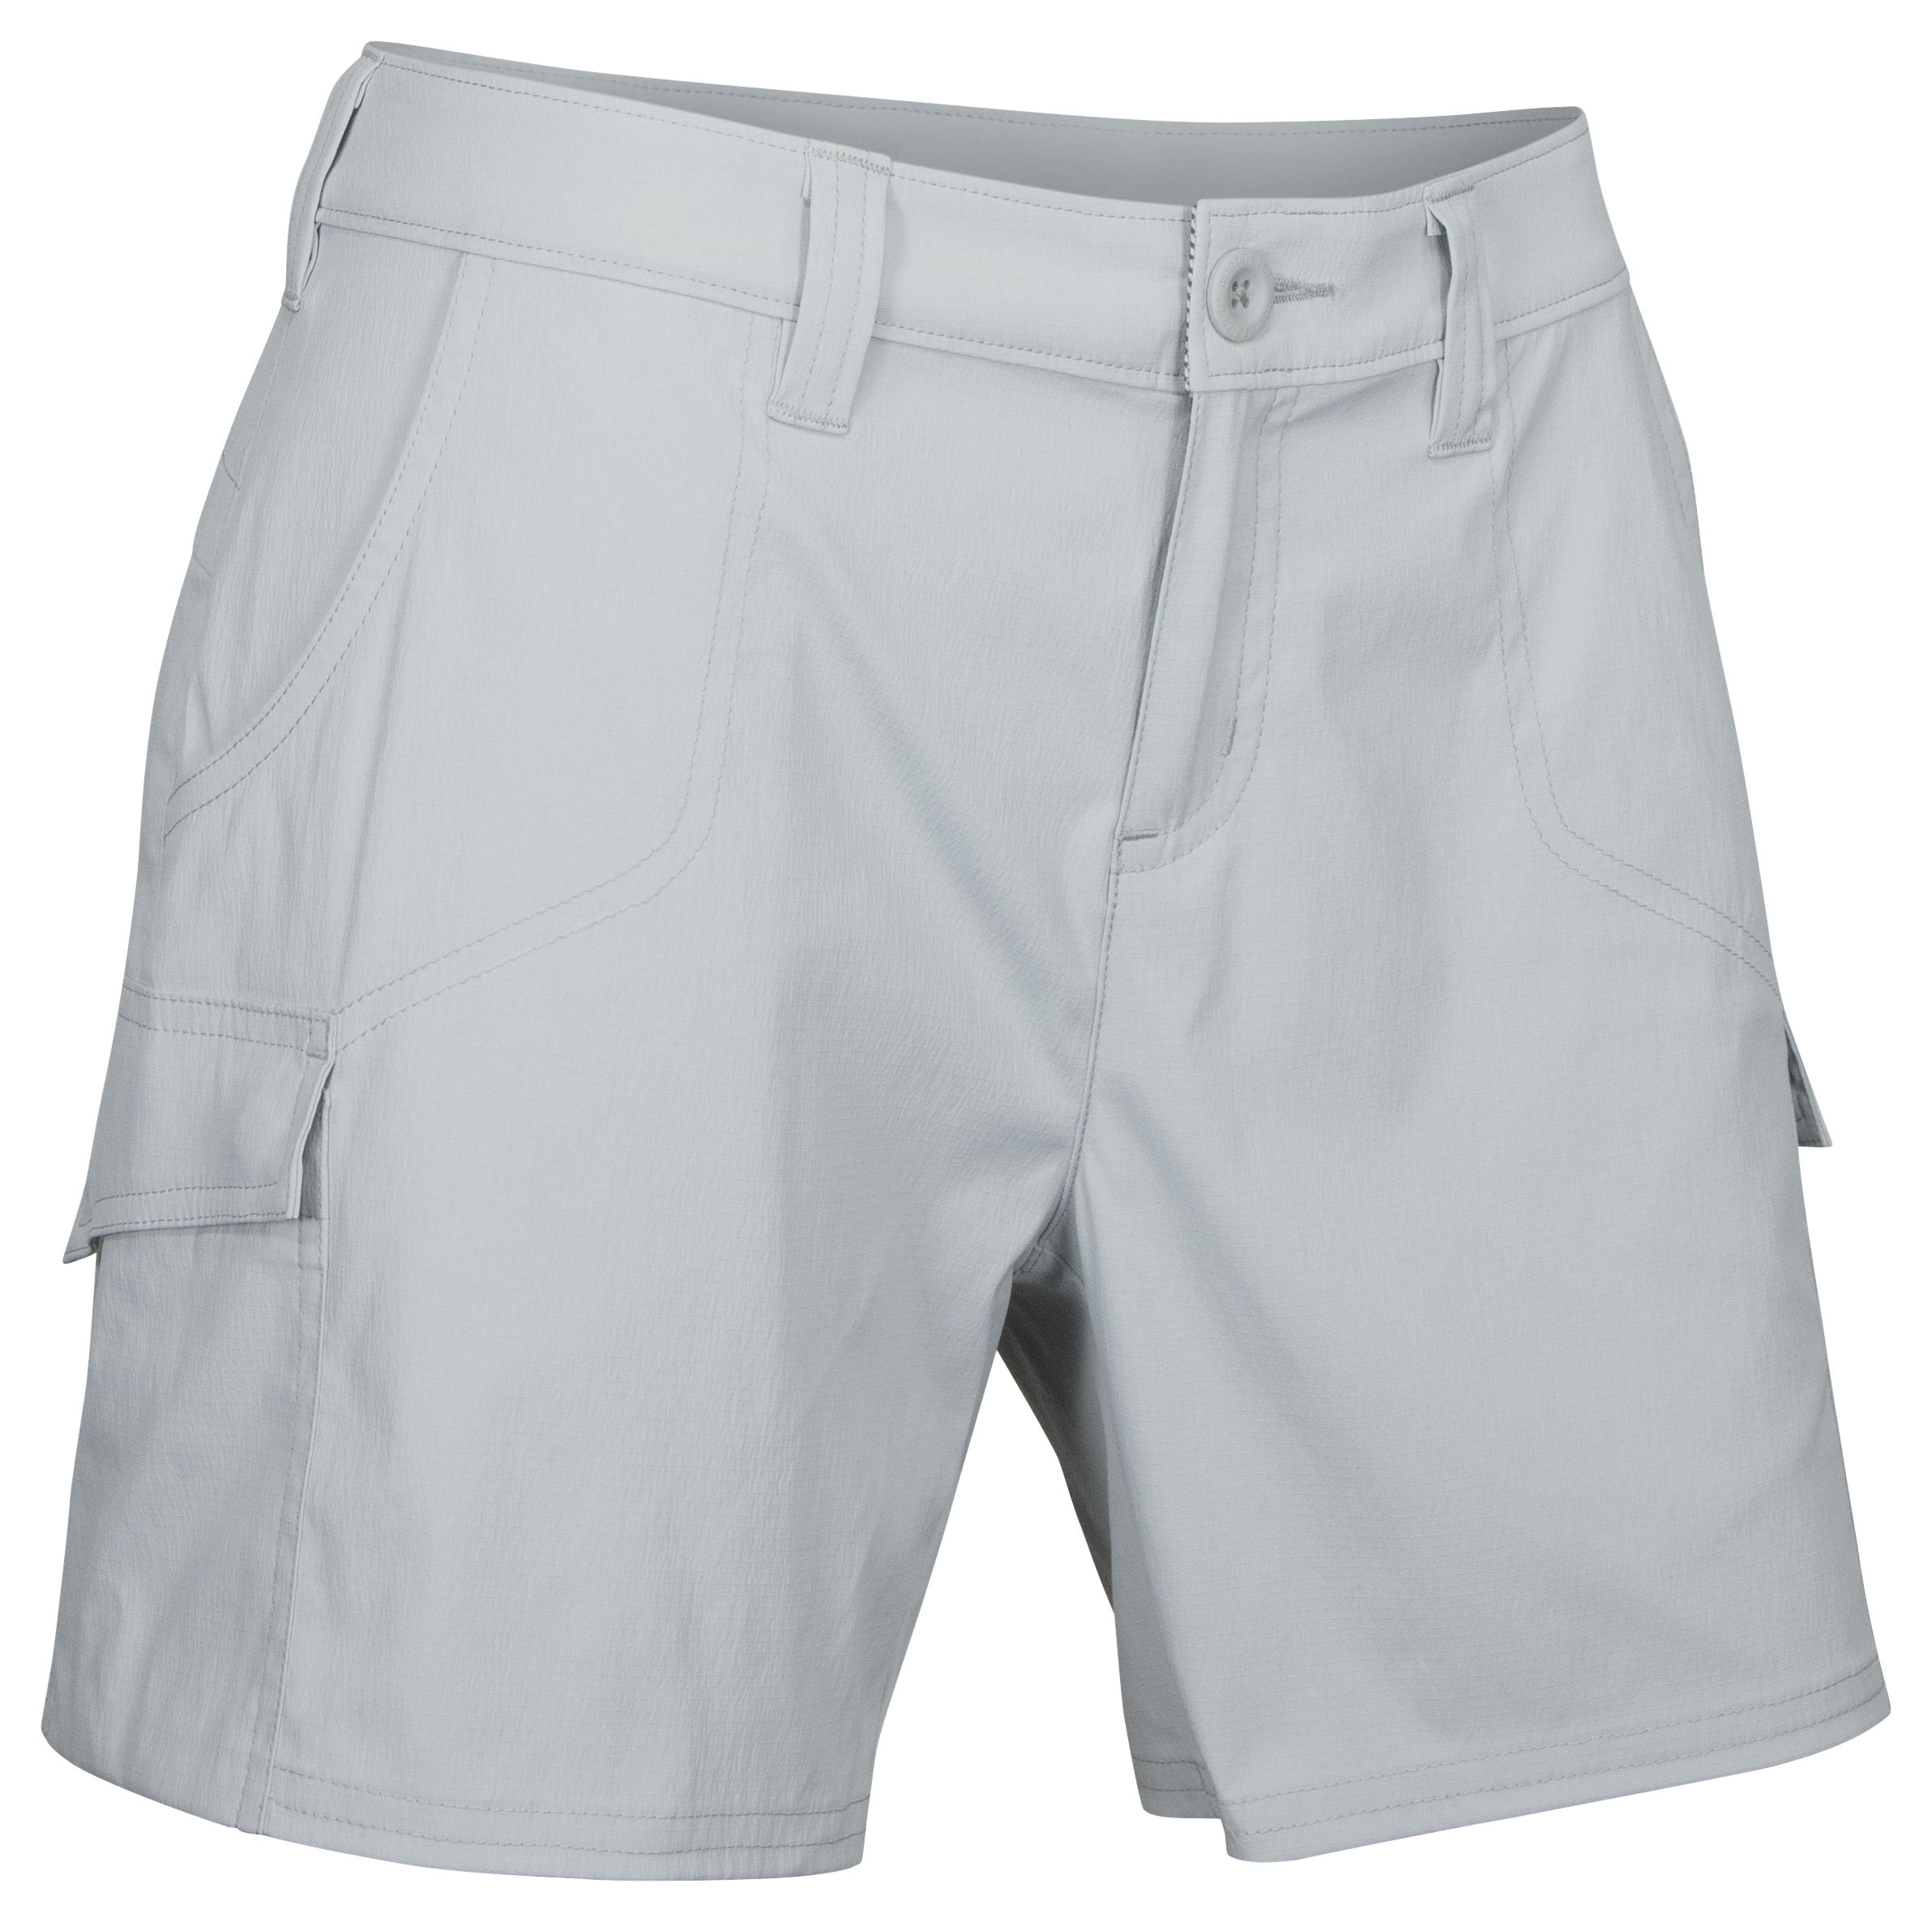 World Wide Sportsman Ripstop Cargo Shorts for Ladies - High Rise-20 - 22W